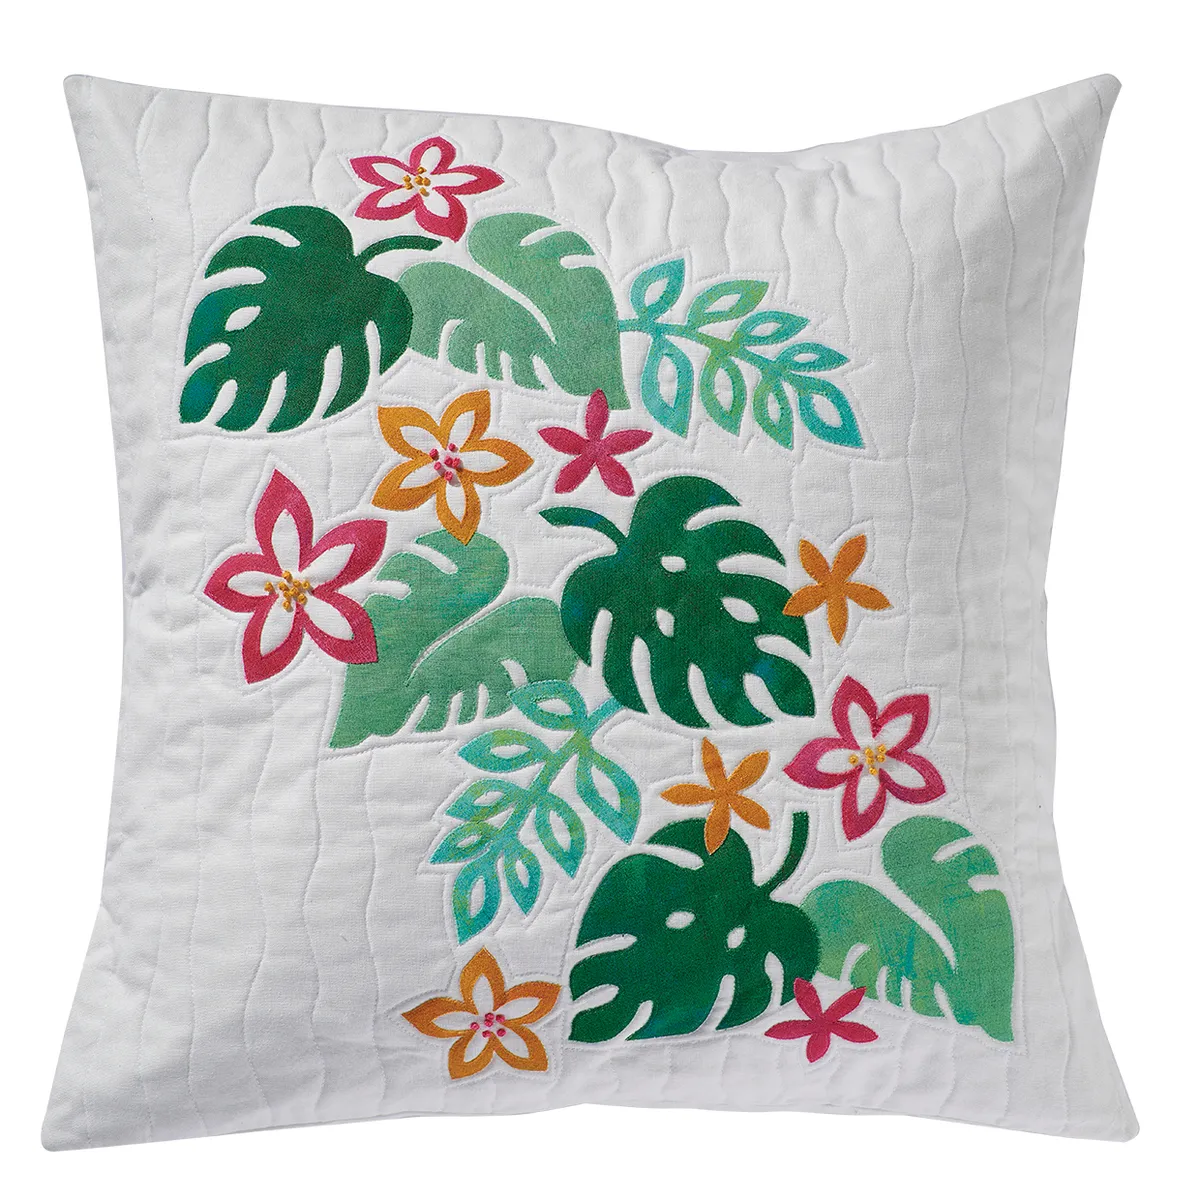 Applique flowers and leaves cushion